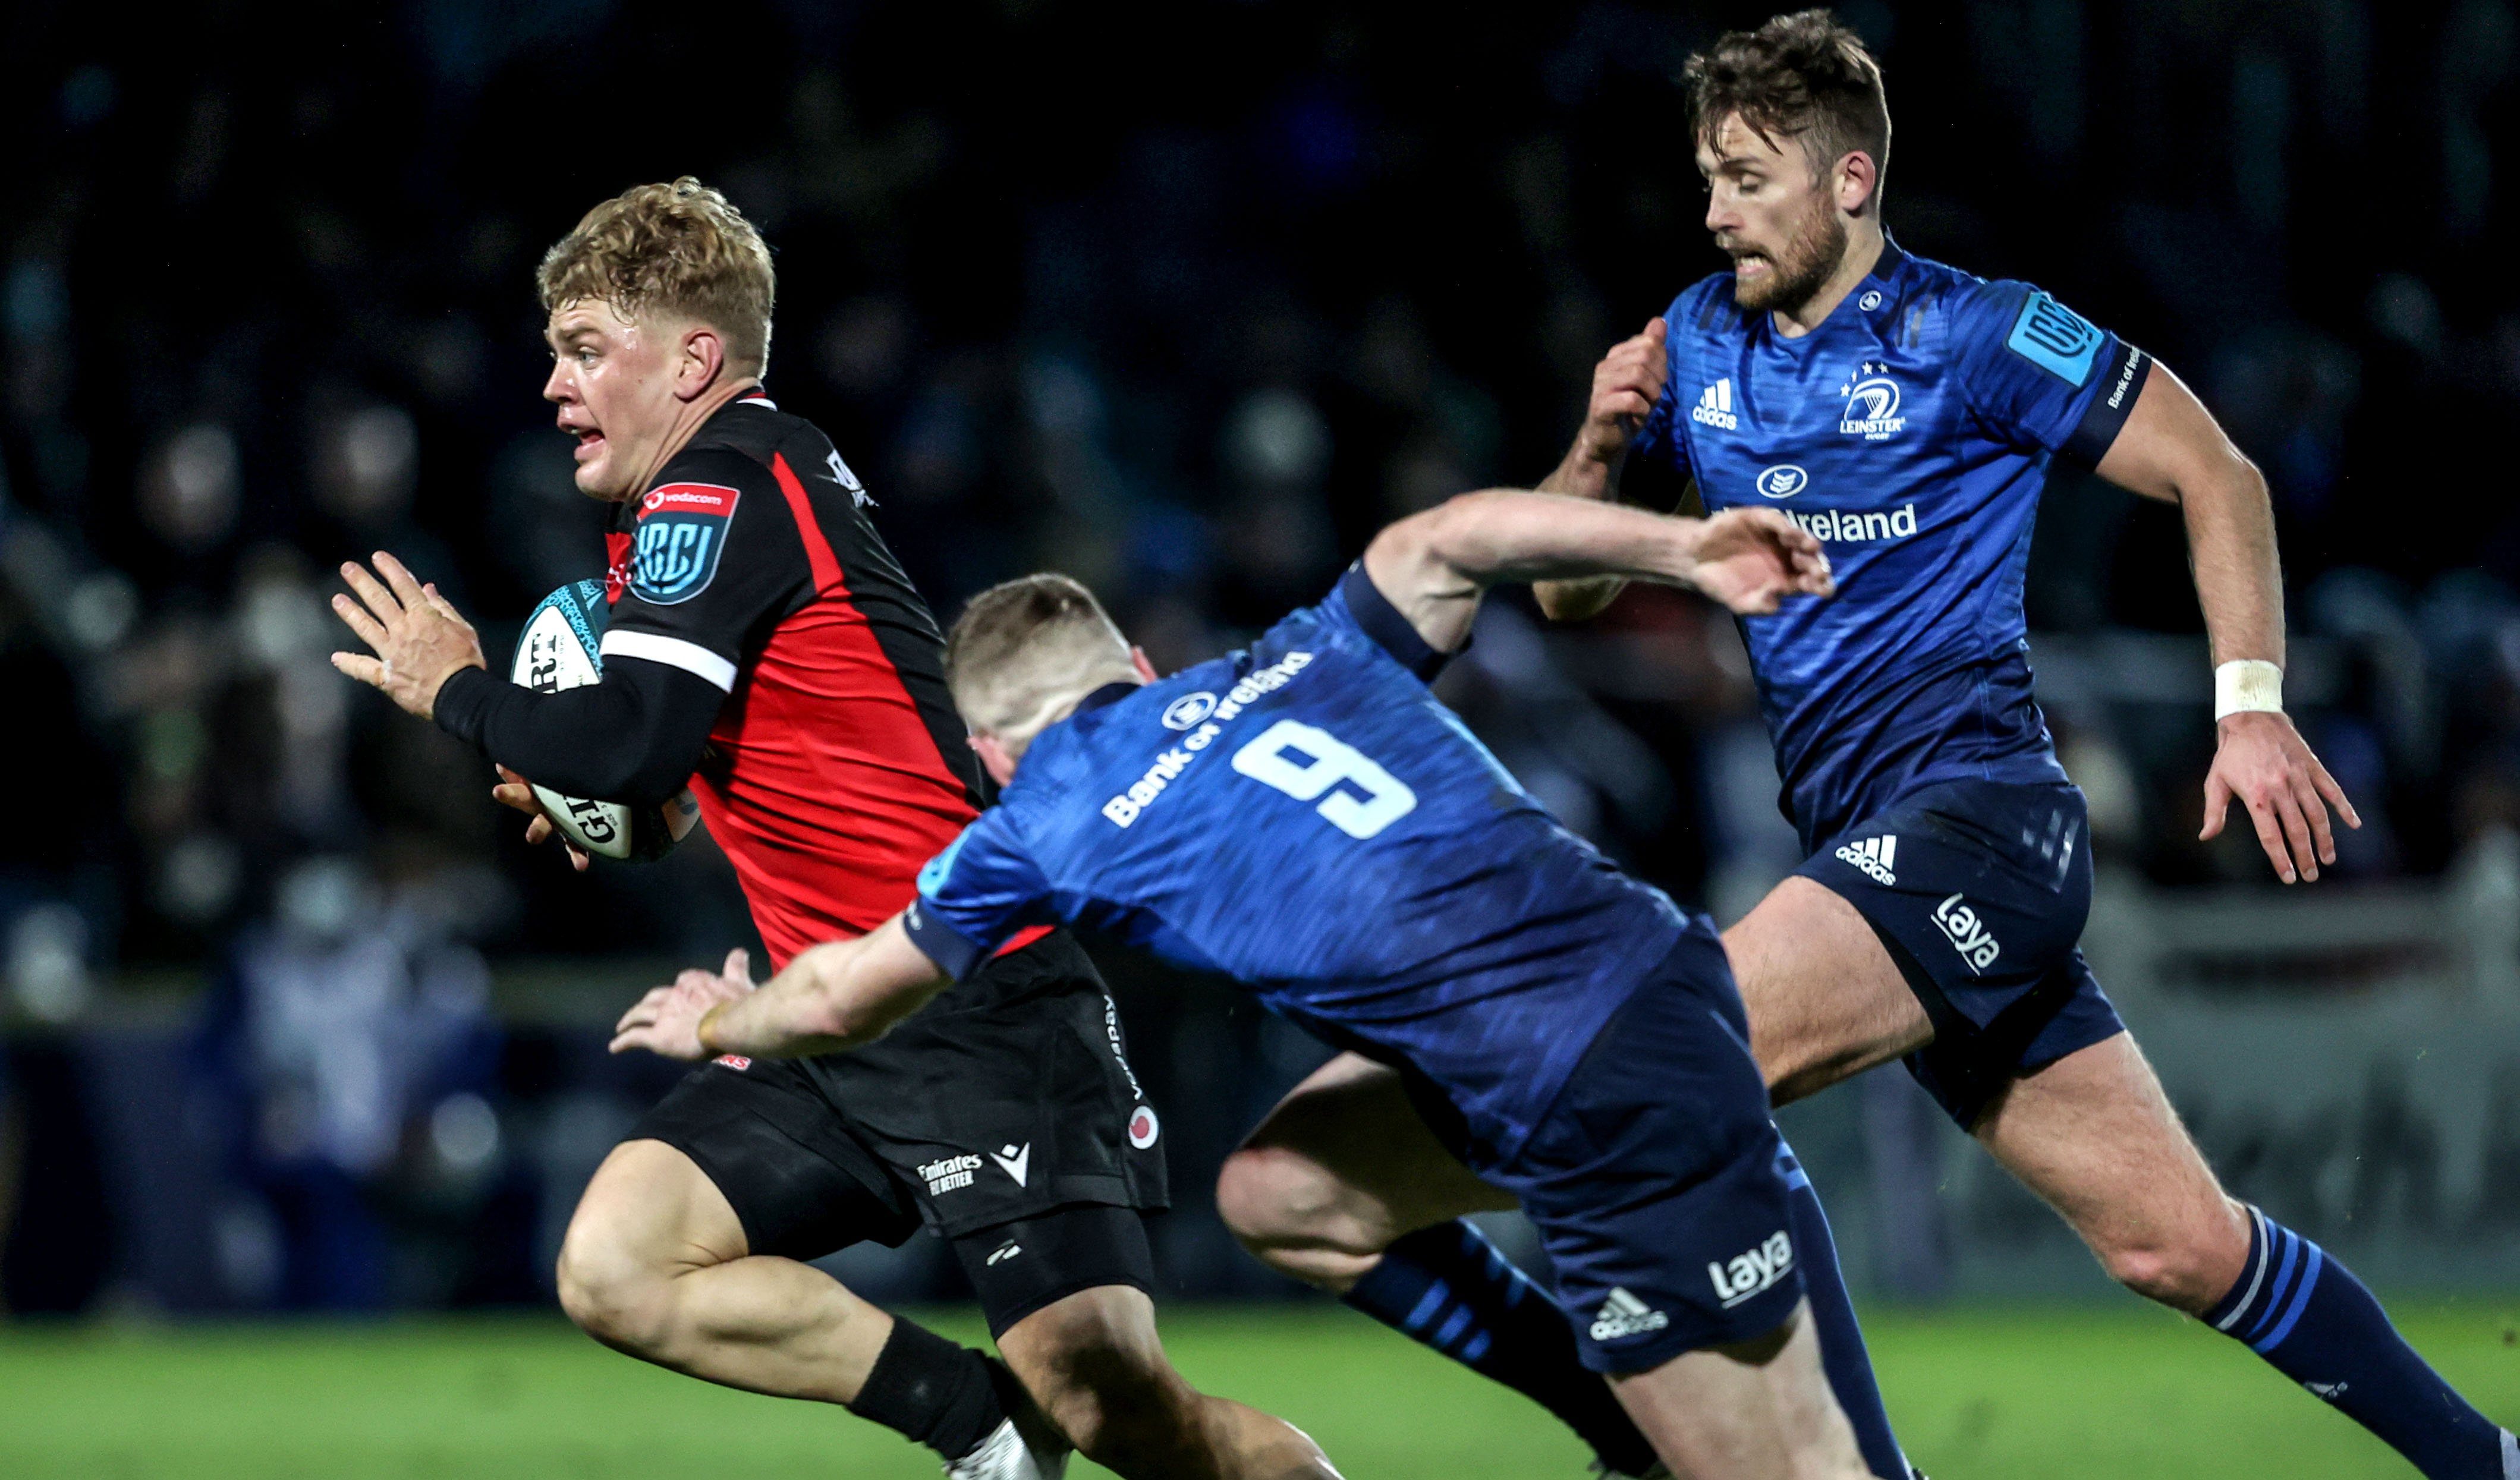 Mandatory Credit: Photo by Dan Sheridan/INPHO/Shutterstock/BackpagePix (12823240af) Leinster vs Emirates Lions. Lions' Morne van den Berg with Nick McCarthy of Leinster United Rugby Championship, RDS, Dublin - 25 Feb 2022